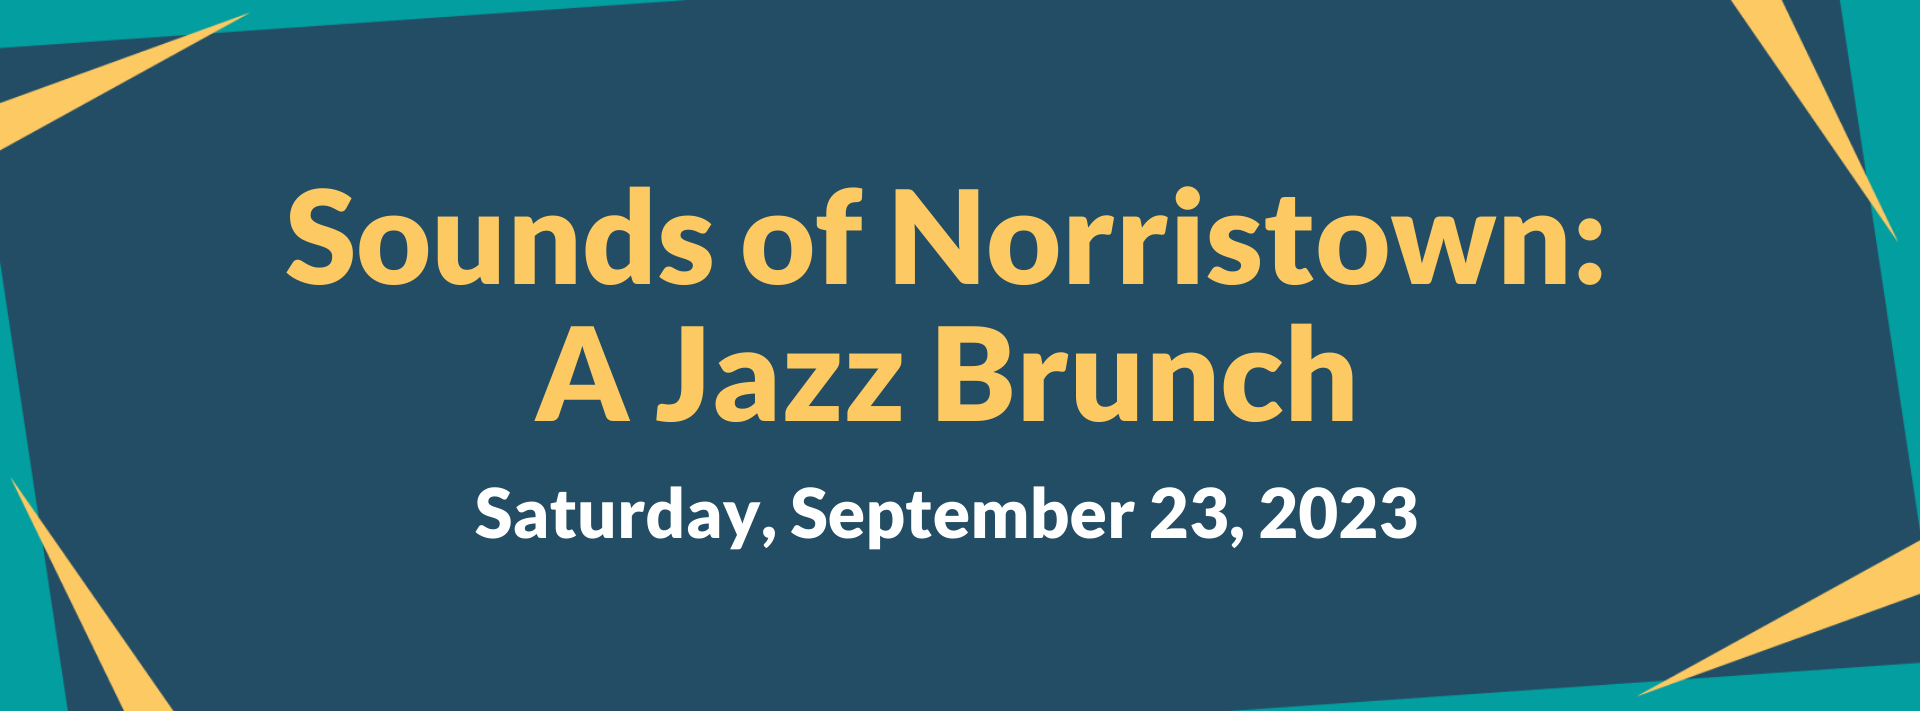 Sounds of Norristown: A Jazz Brunch<br />
Saturday, September 23, 2023